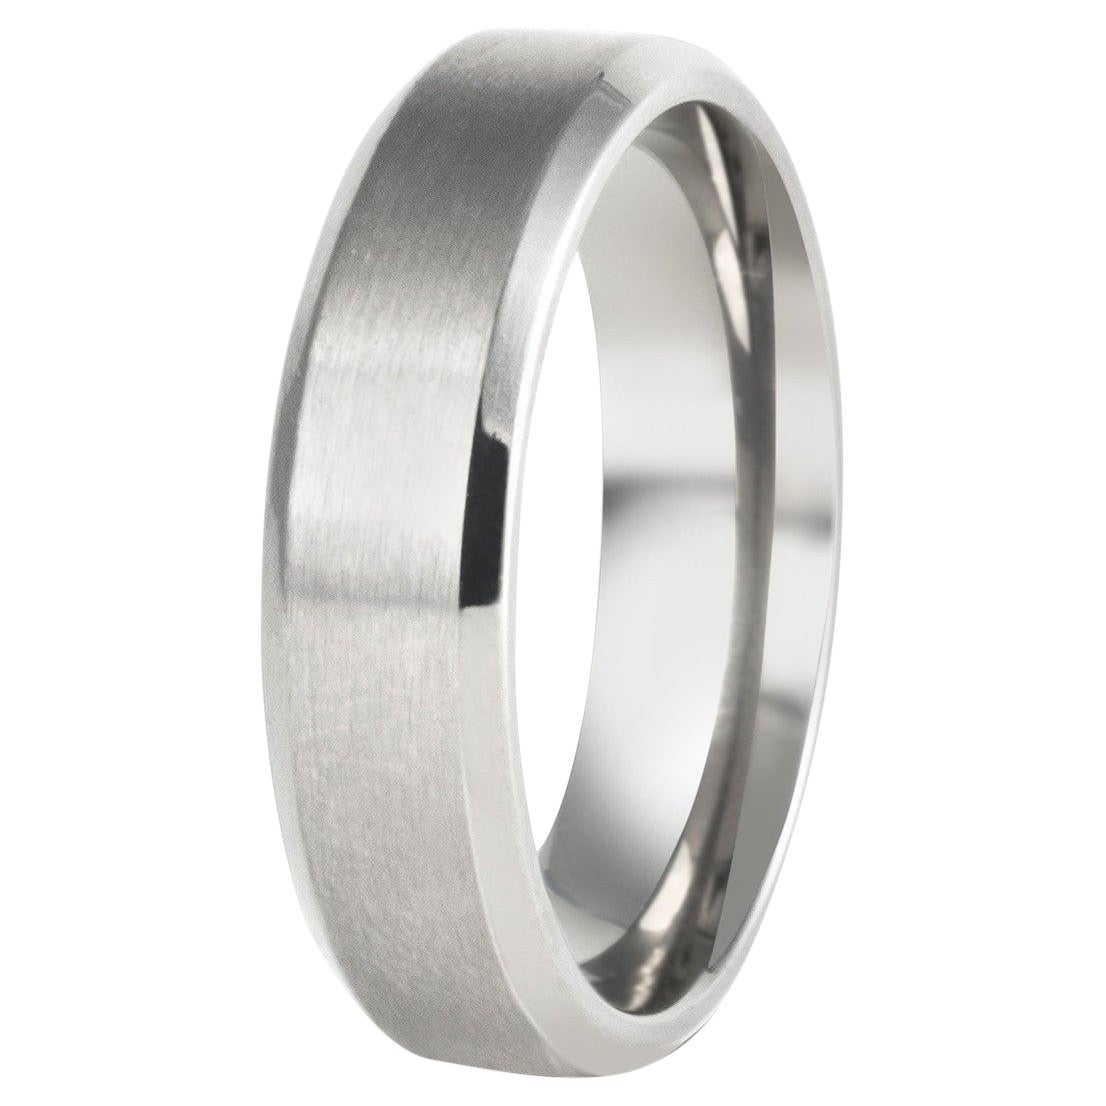 The Orwell : Flat Titanium with Bright Beveled Edge Comfort Fit Wedding Band